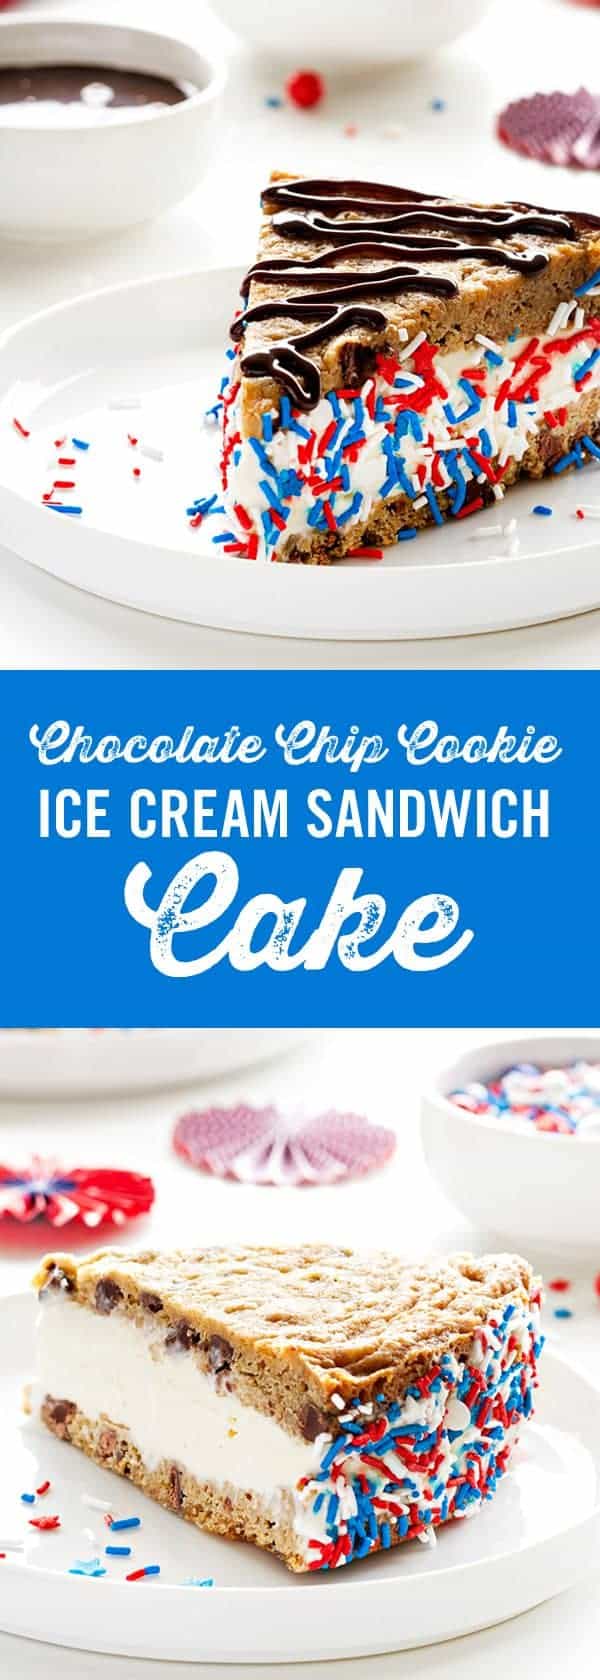 Chocolate Chip Cookie Ice Cream Sandwich Cake is the perfect dessert for any summer picnic or barbecue. Your guests will be raving about this one!